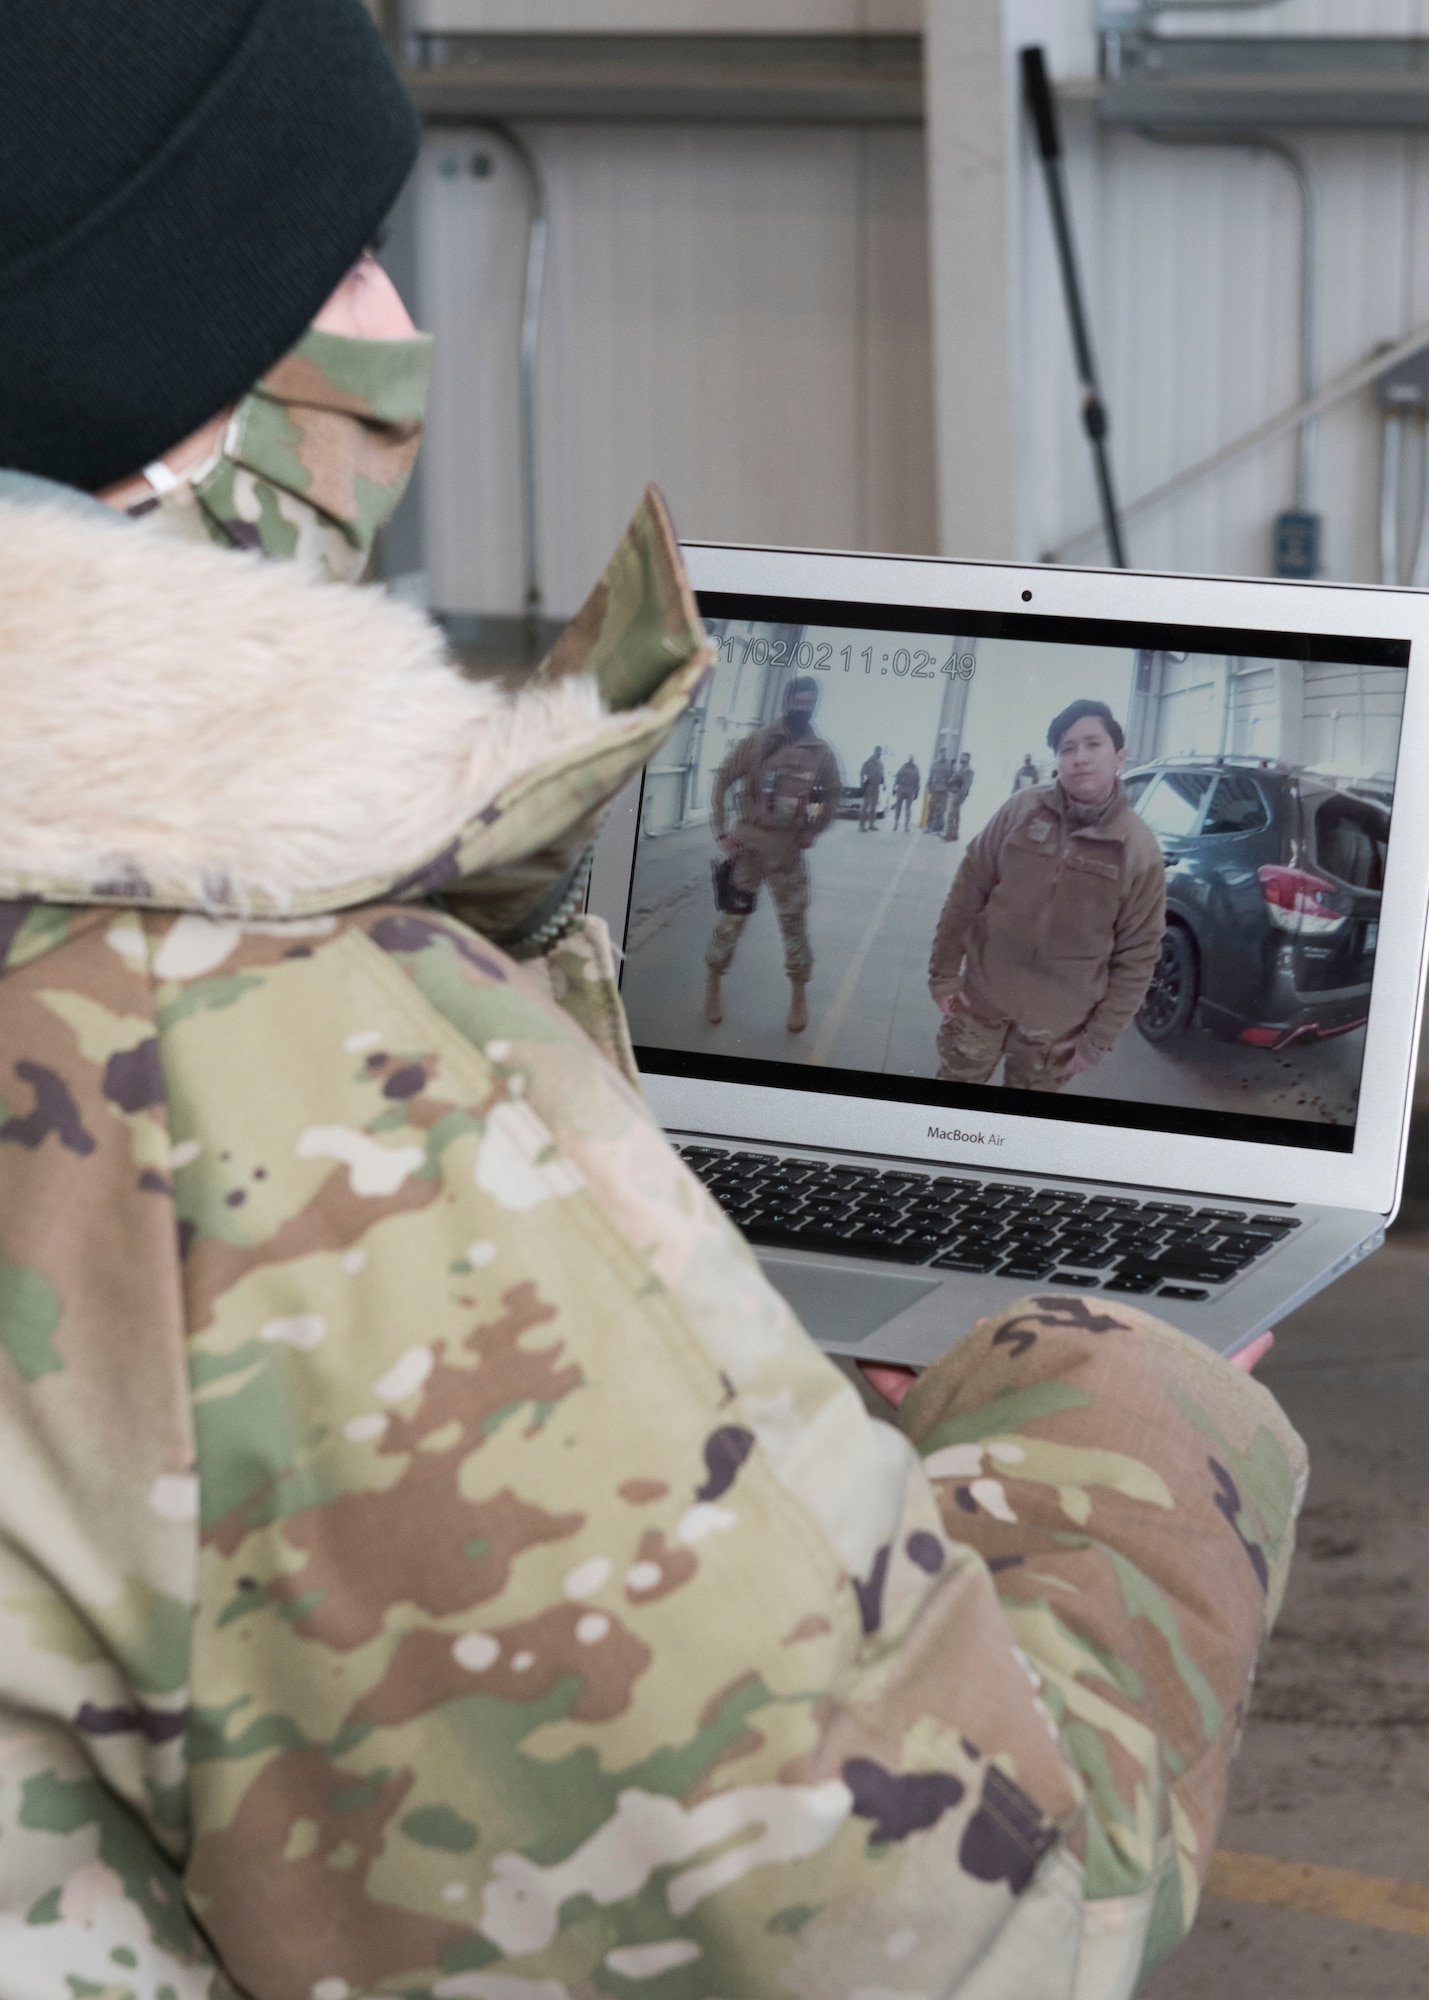 A body camera’s feed is livestreamed to a laptop to demonstrate its capabilities during an immersion with the 673d Security Forces Squadron at Joint Base Elmendorf-Richardson, Alaska, Feb. 2, 2021. The tour familiarized base leadership with the 673d SFS and its role in maintaining the safety of the JBER community and security of the installation and its resources.